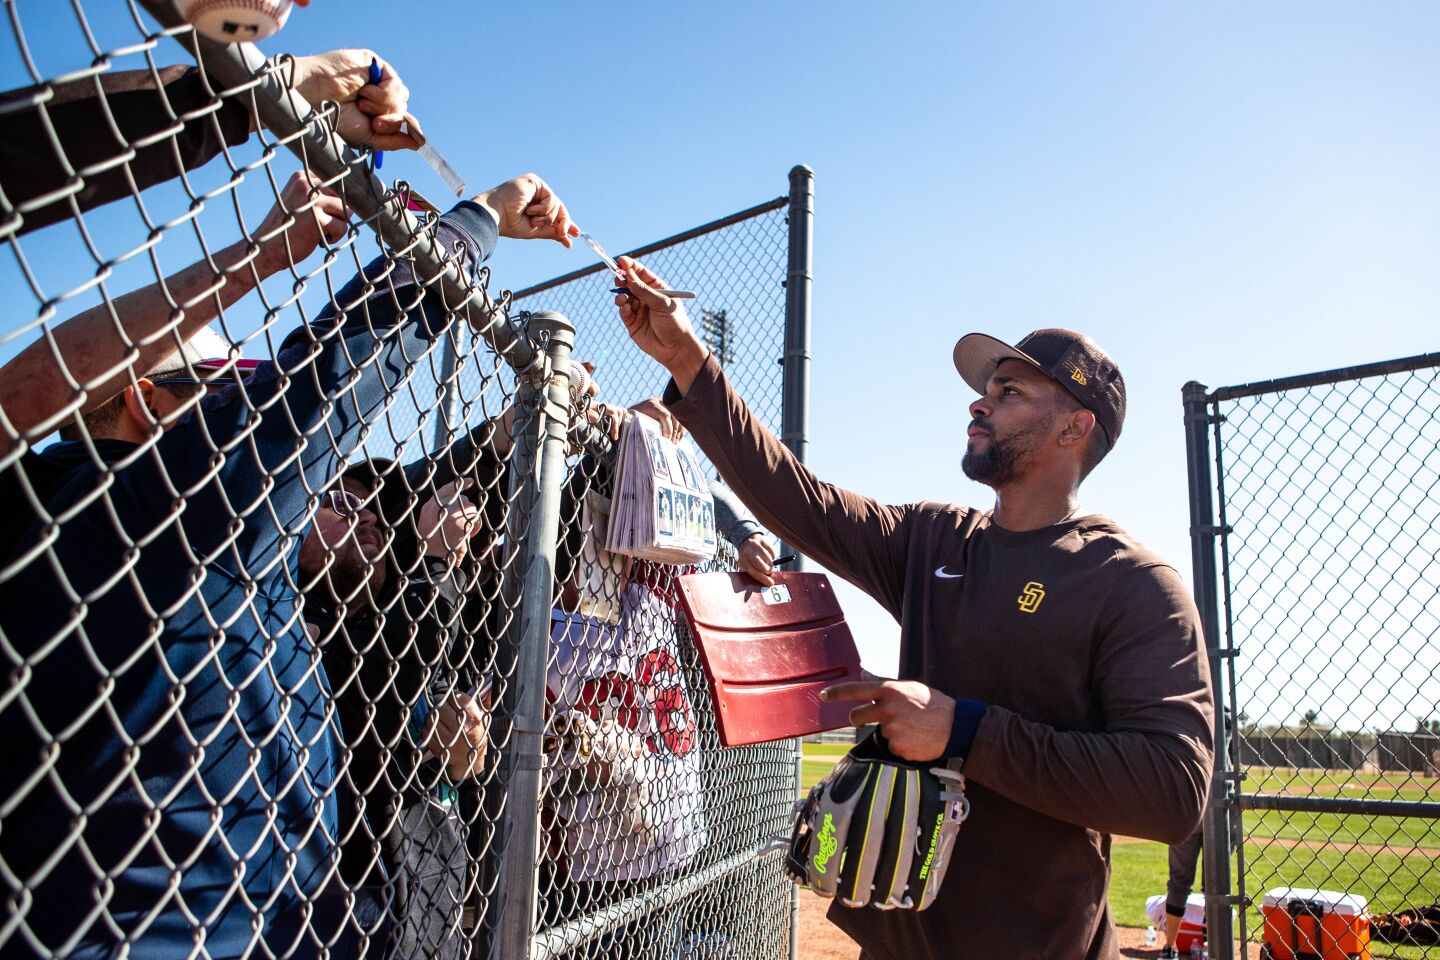 Padres shortstop Xander Bogaerts signs autographs for fans during a spring training practice at Peoria Sports Complex on Thursday.